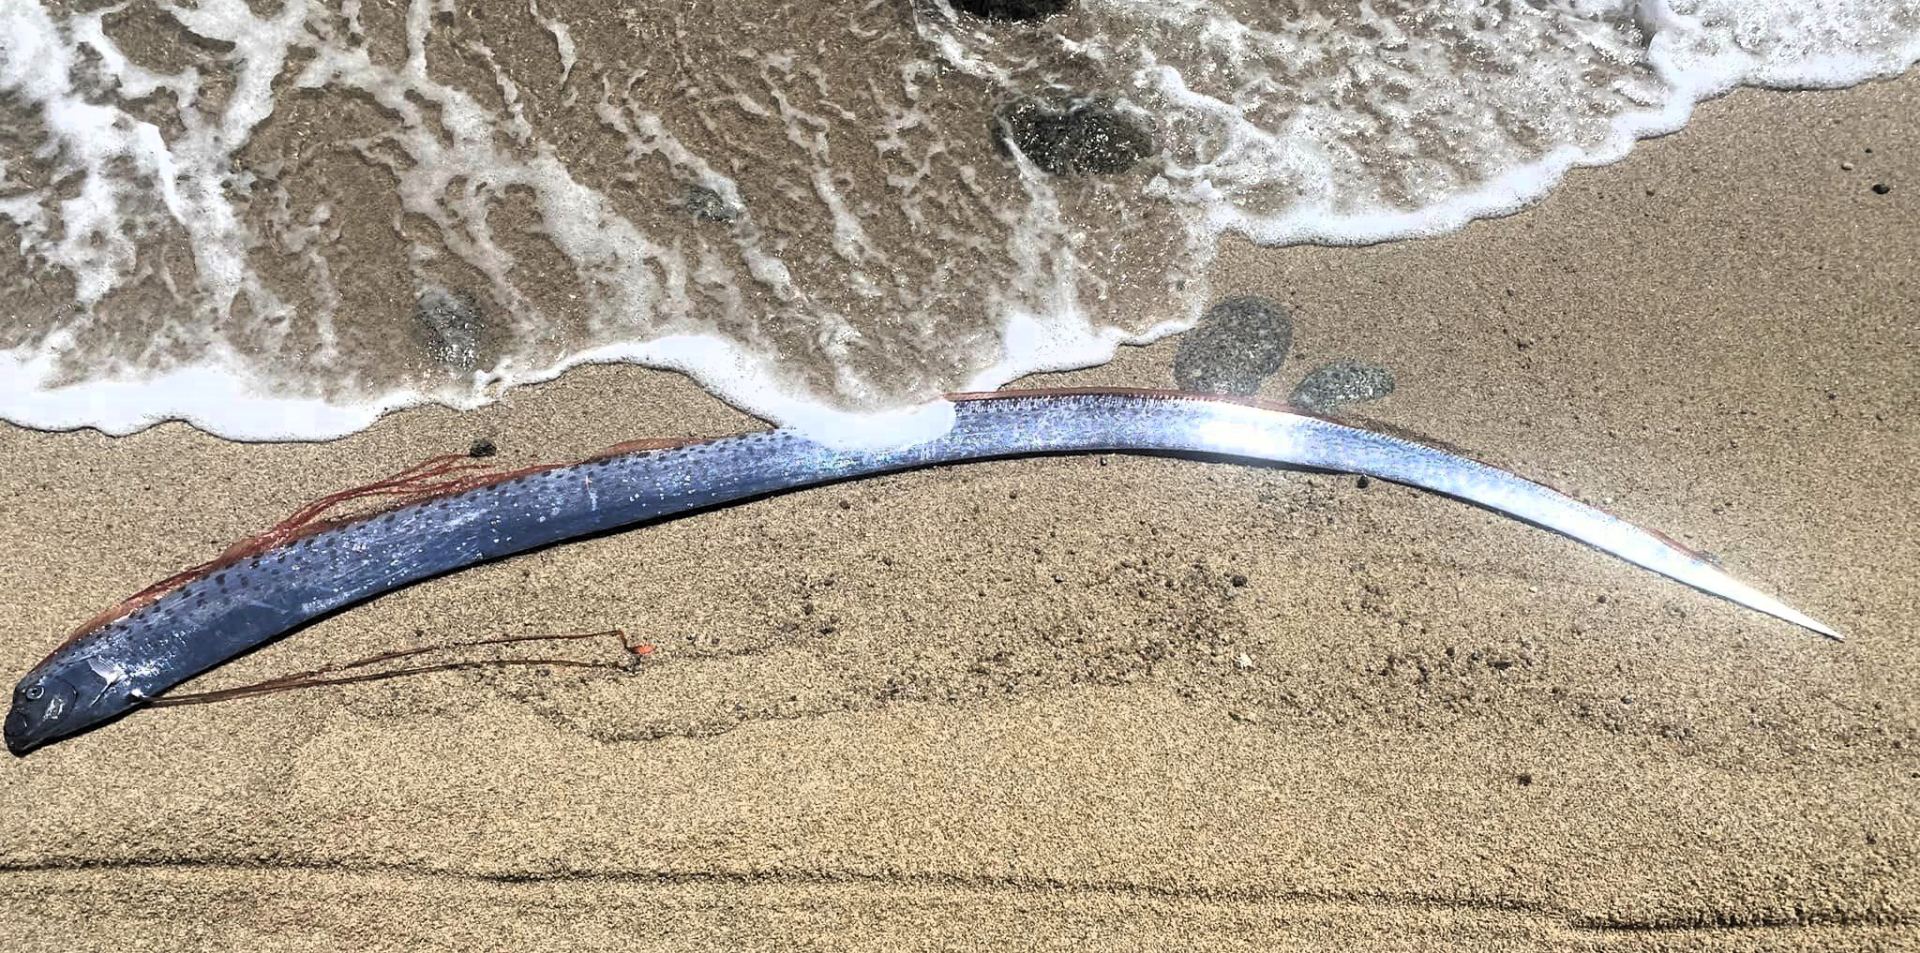 A deep-sea oarfish, known as a harbinger of natural disasters, washed up on a tourist beach, stirring concern among locals. The legend holds that their appearance foreshadows calamities like earthquakes, sparking fear and superstition.